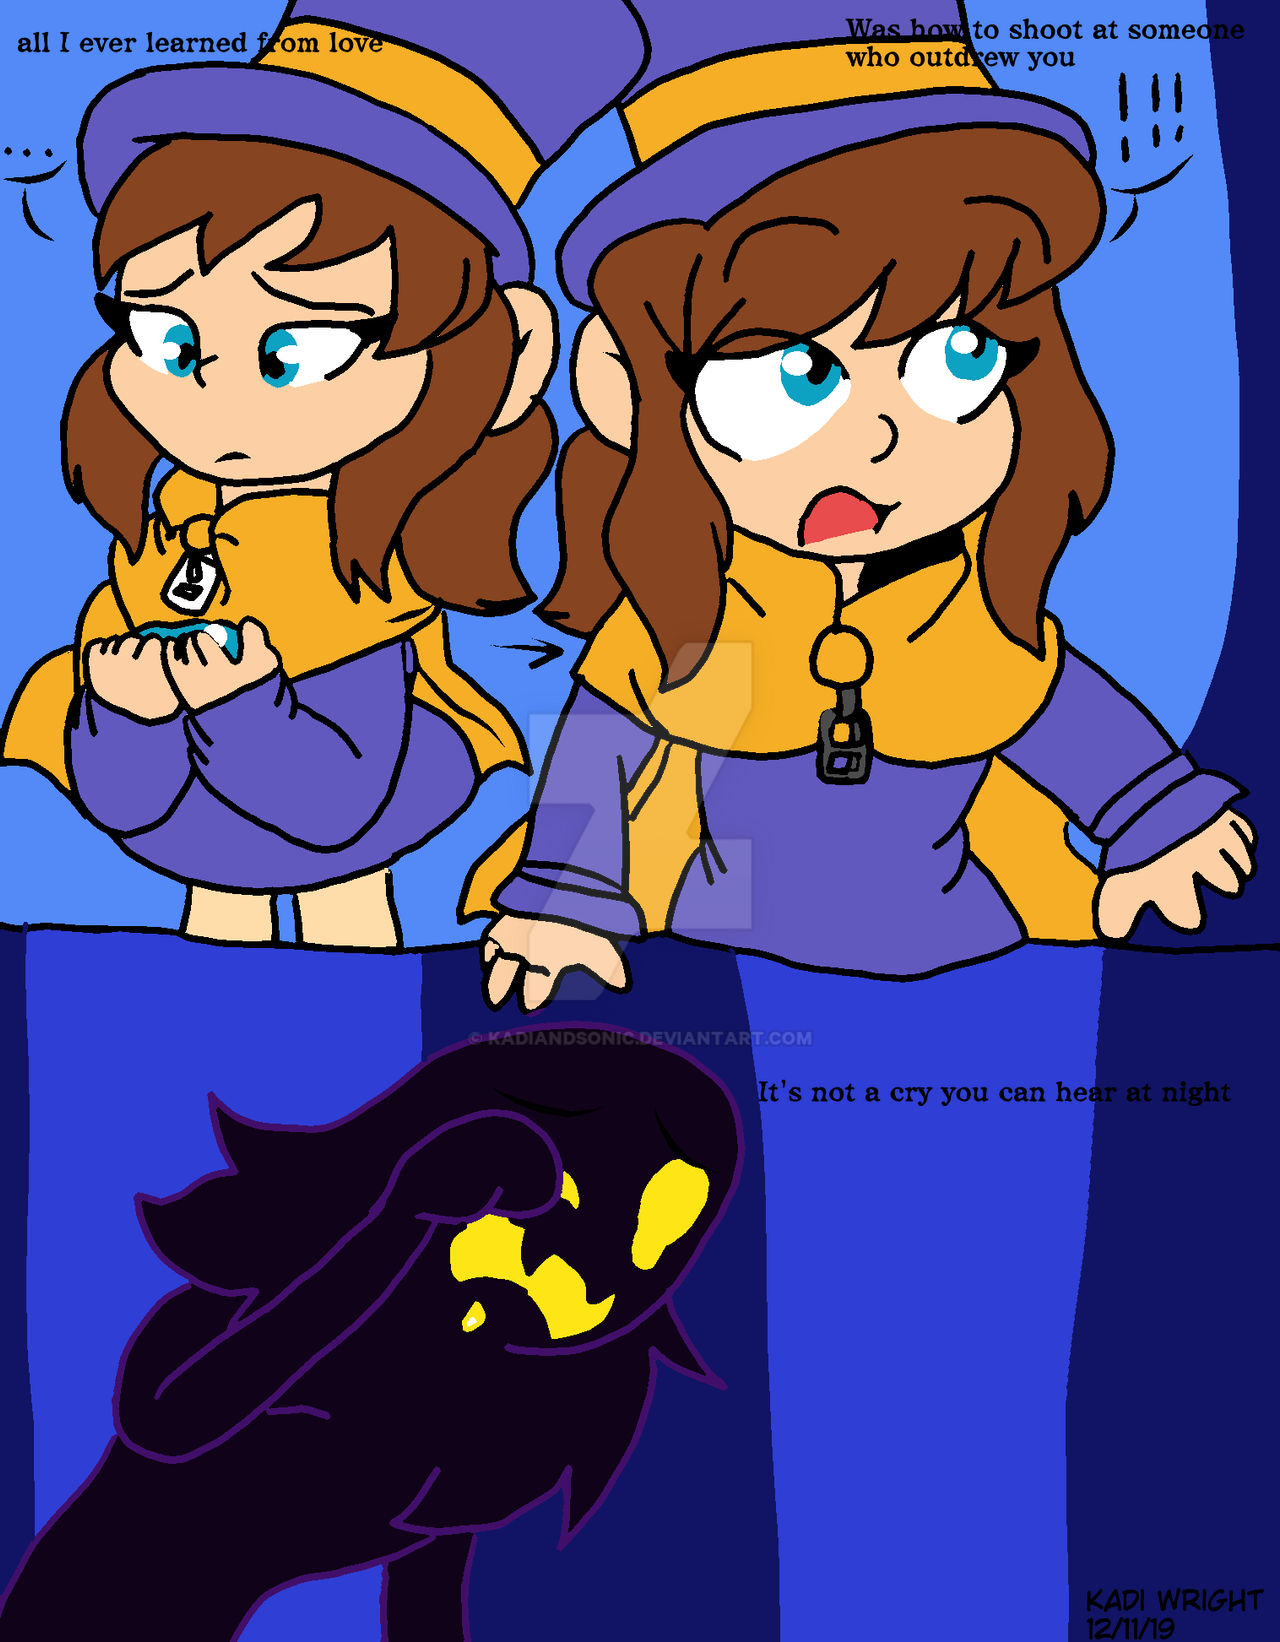 A Hat in Time by VickyViolet on DeviantArt